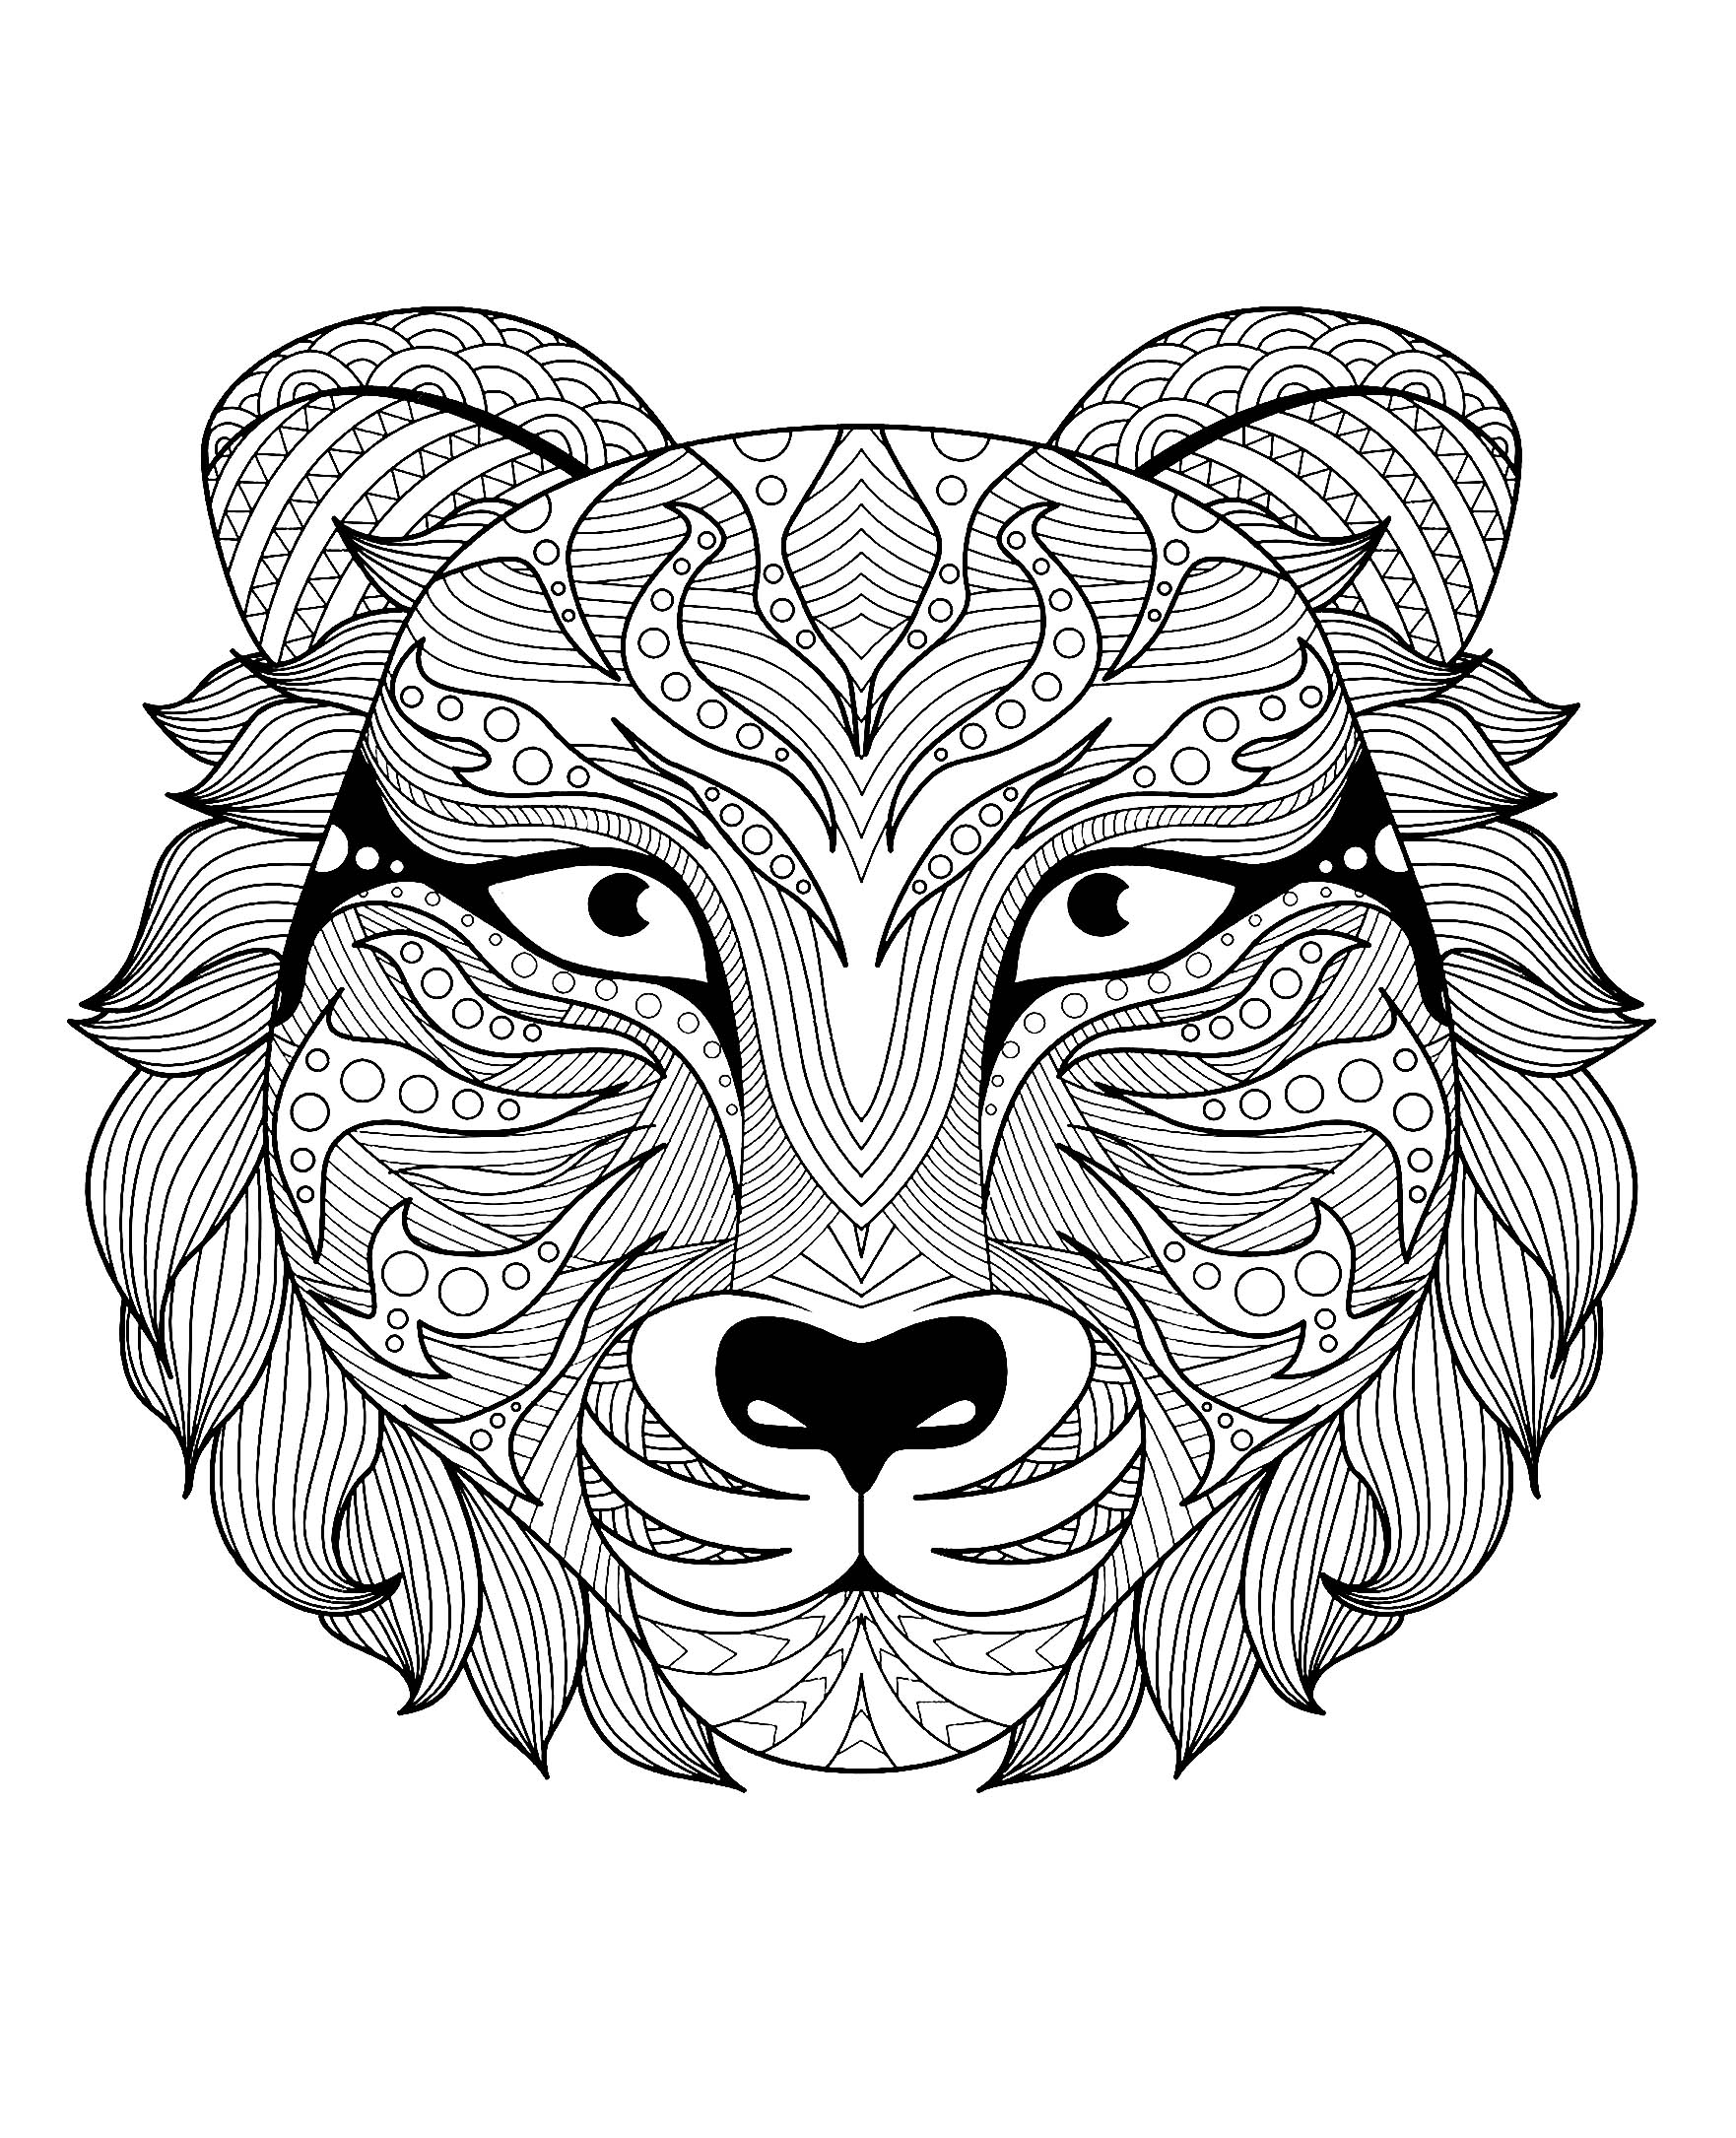 Tigers free to color for kids - Tigers Kids Coloring Pages